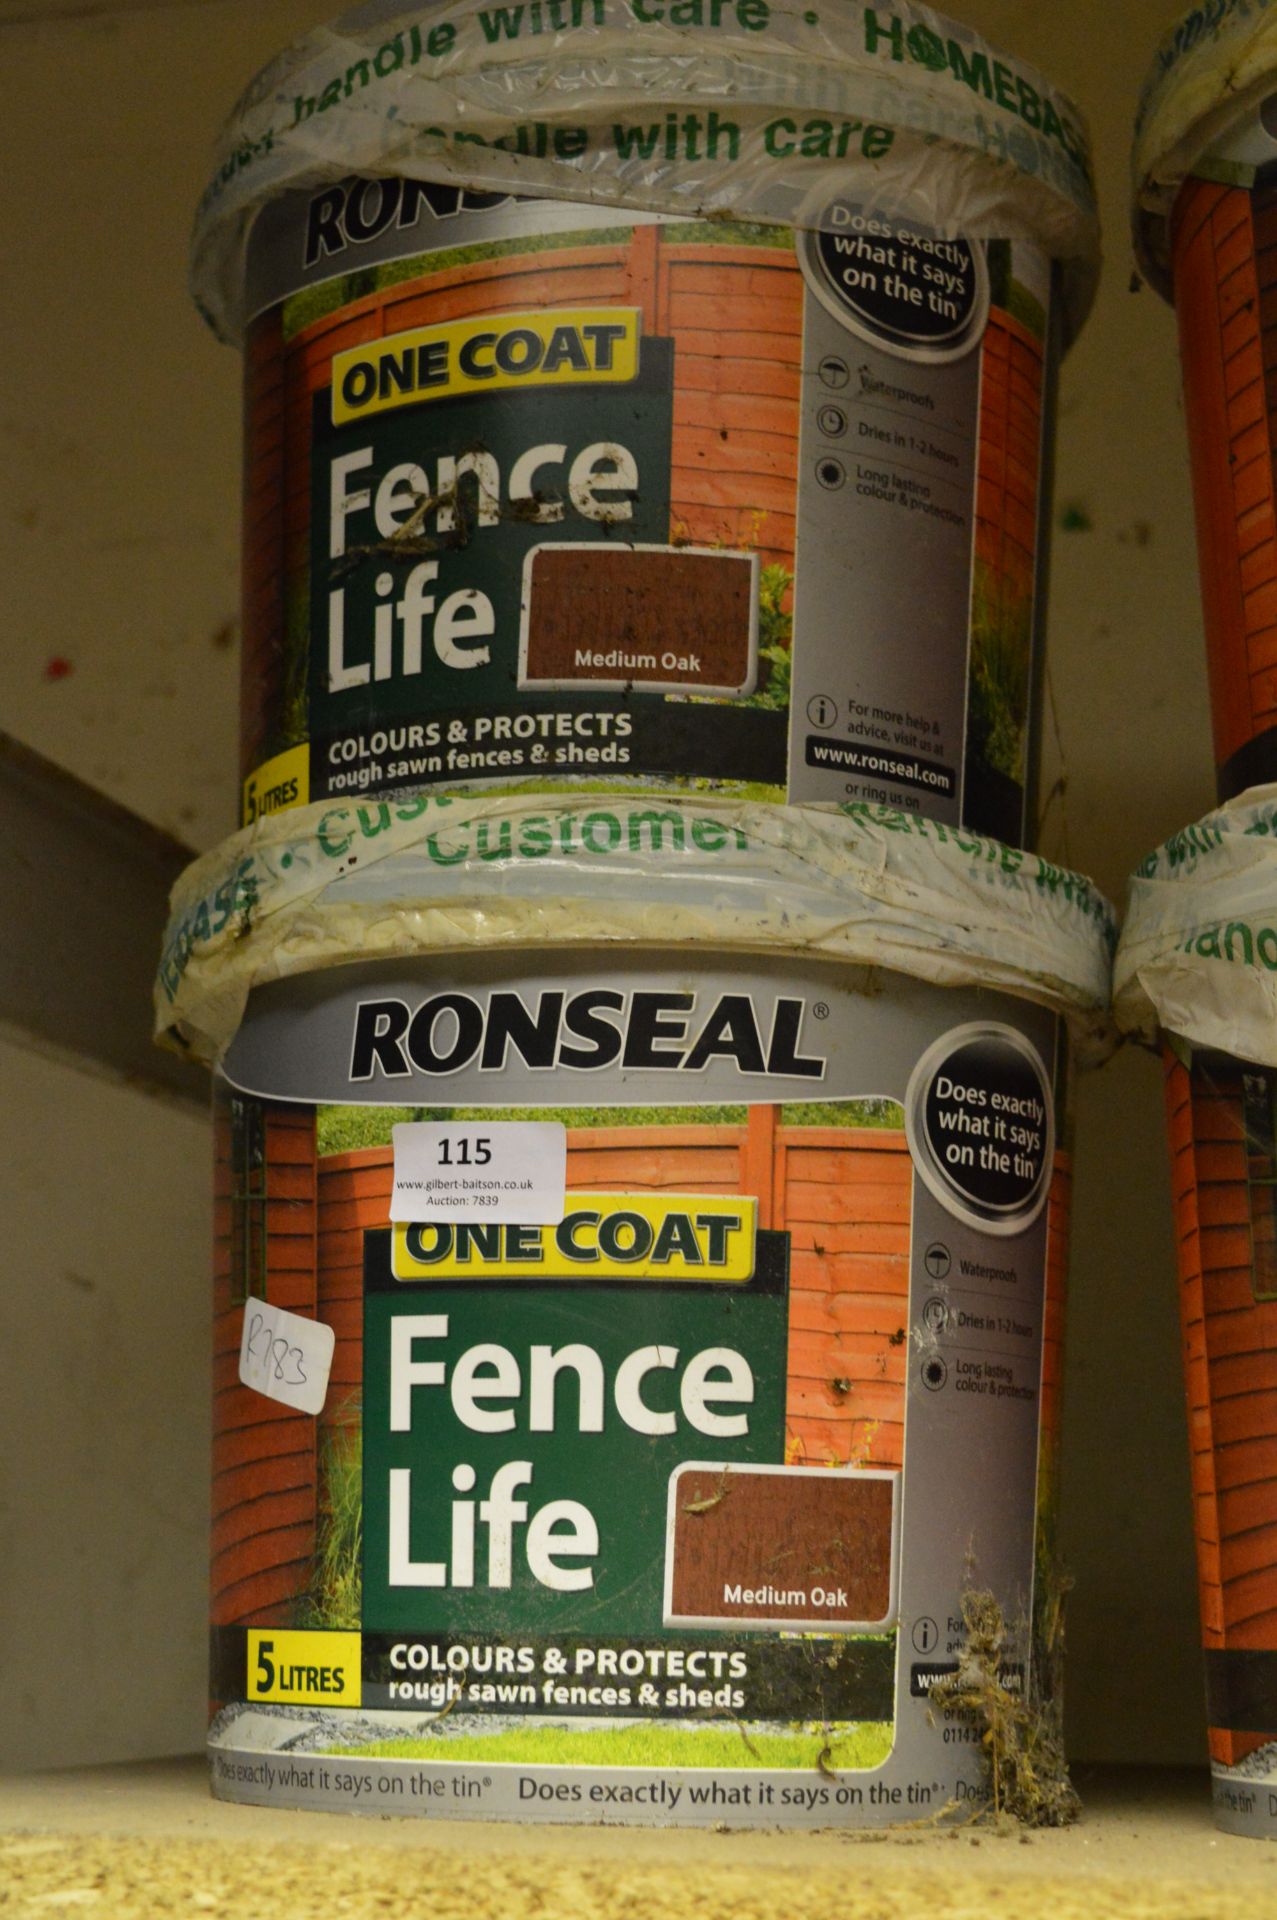 Two Tubs of Ronseal Fence Life (Medium Oak)